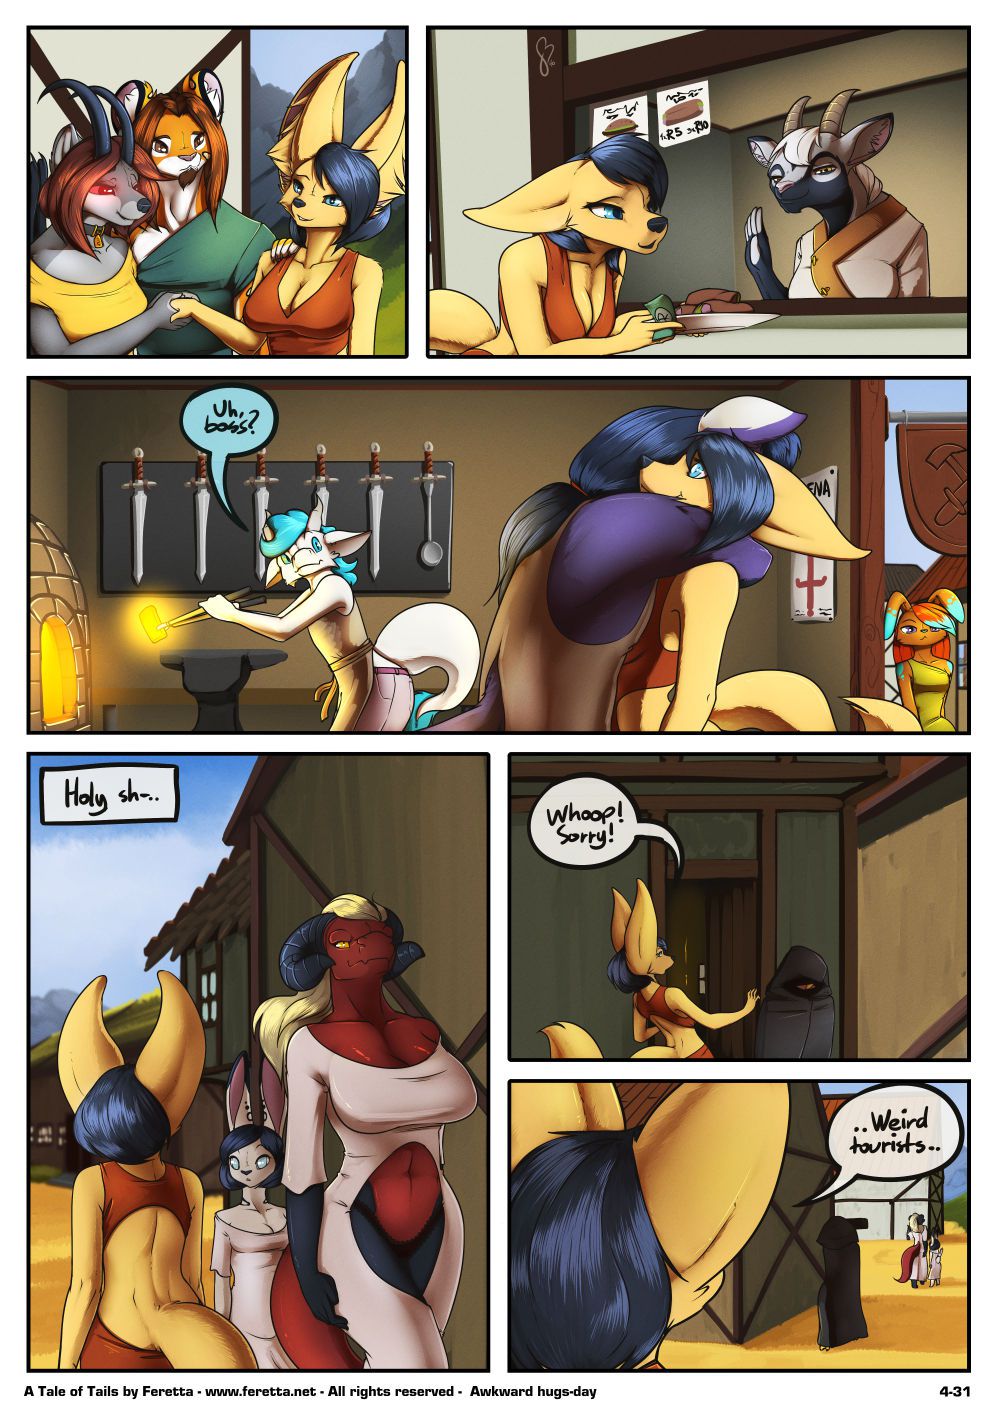 [Feretta] A Tale of Tails (Ongoing) 181